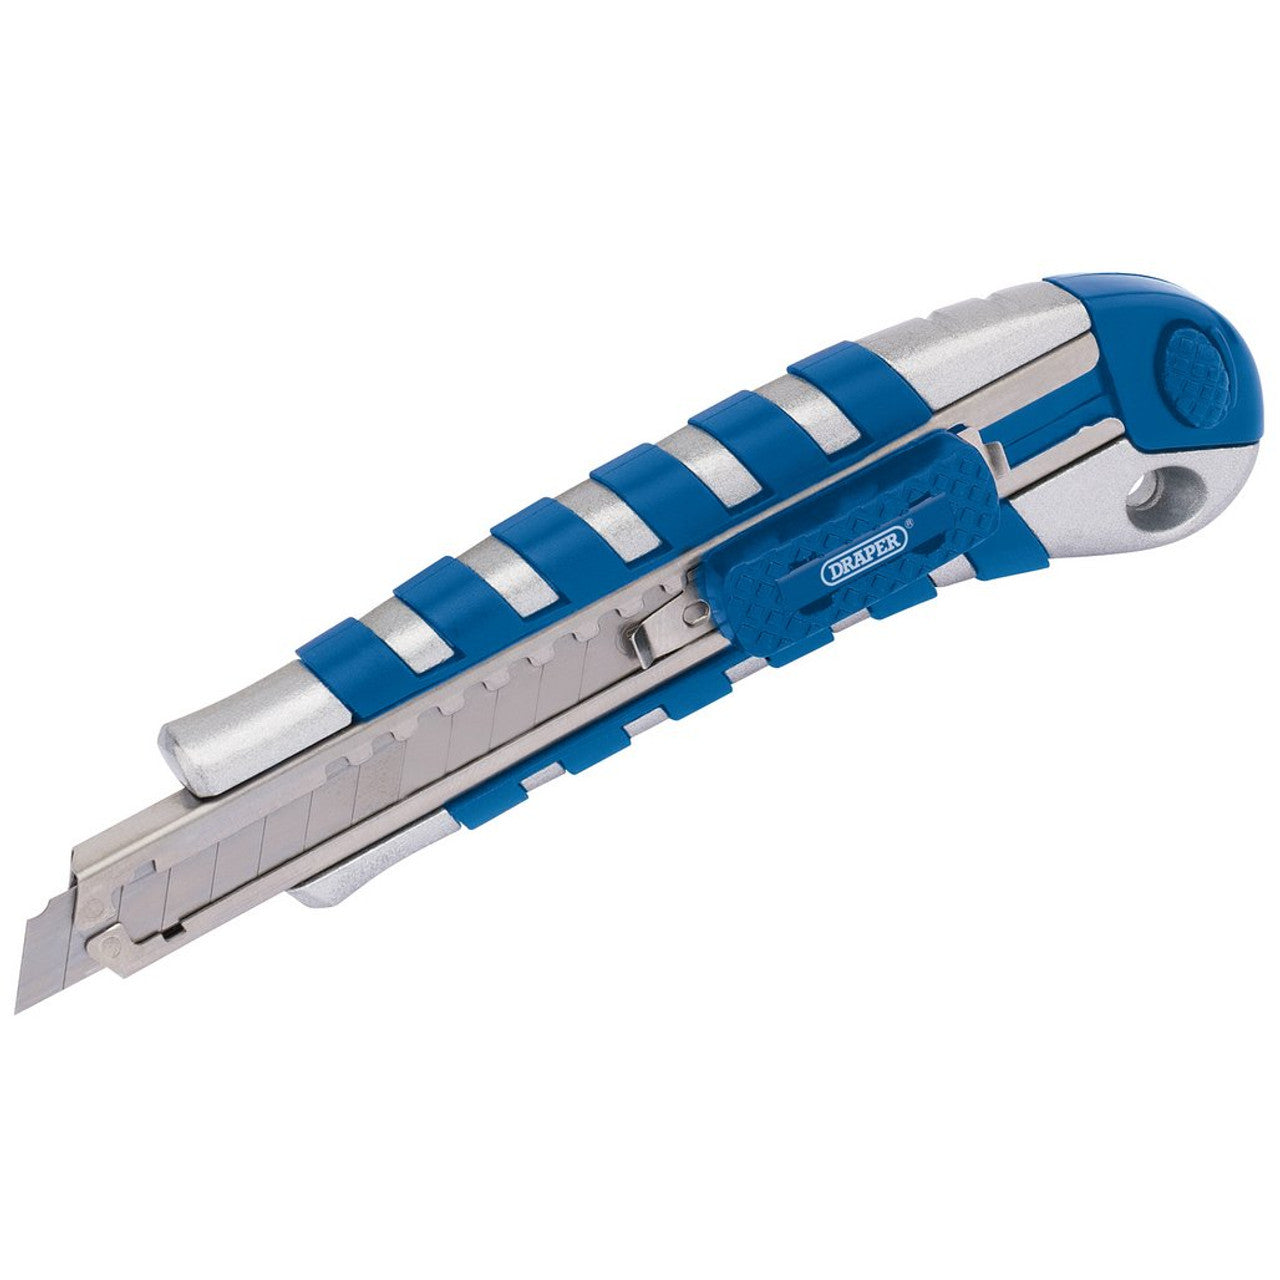 Draper 82836 Retractable Cutter with Soft Grip, 9mm